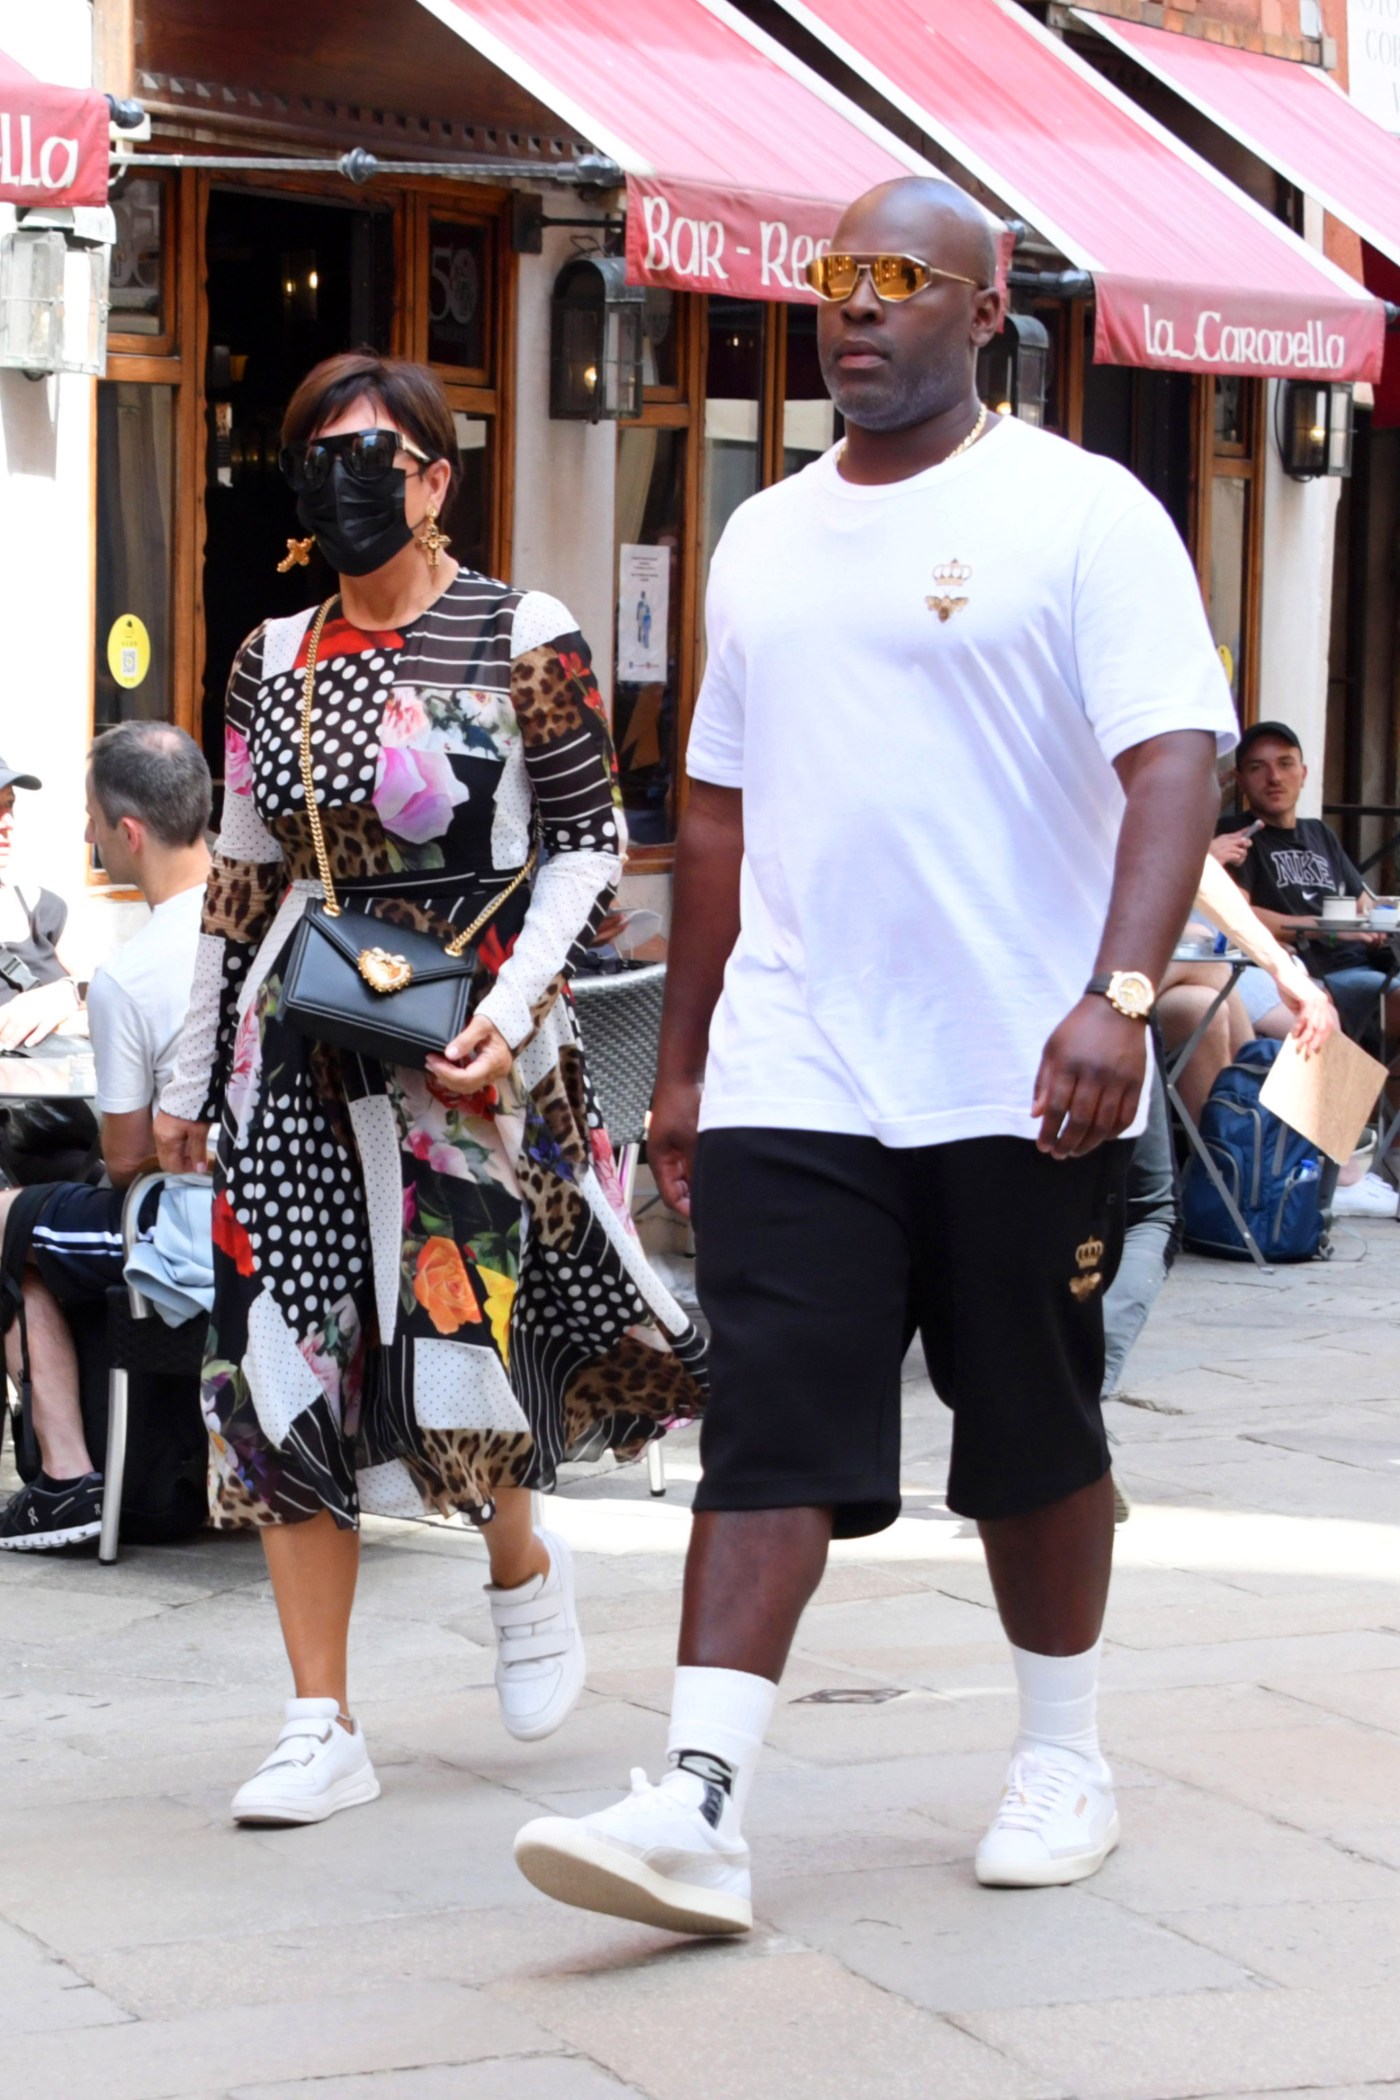 Kris Jenner, Boyfriend Corey Gamble Step Out in Italy: Photos